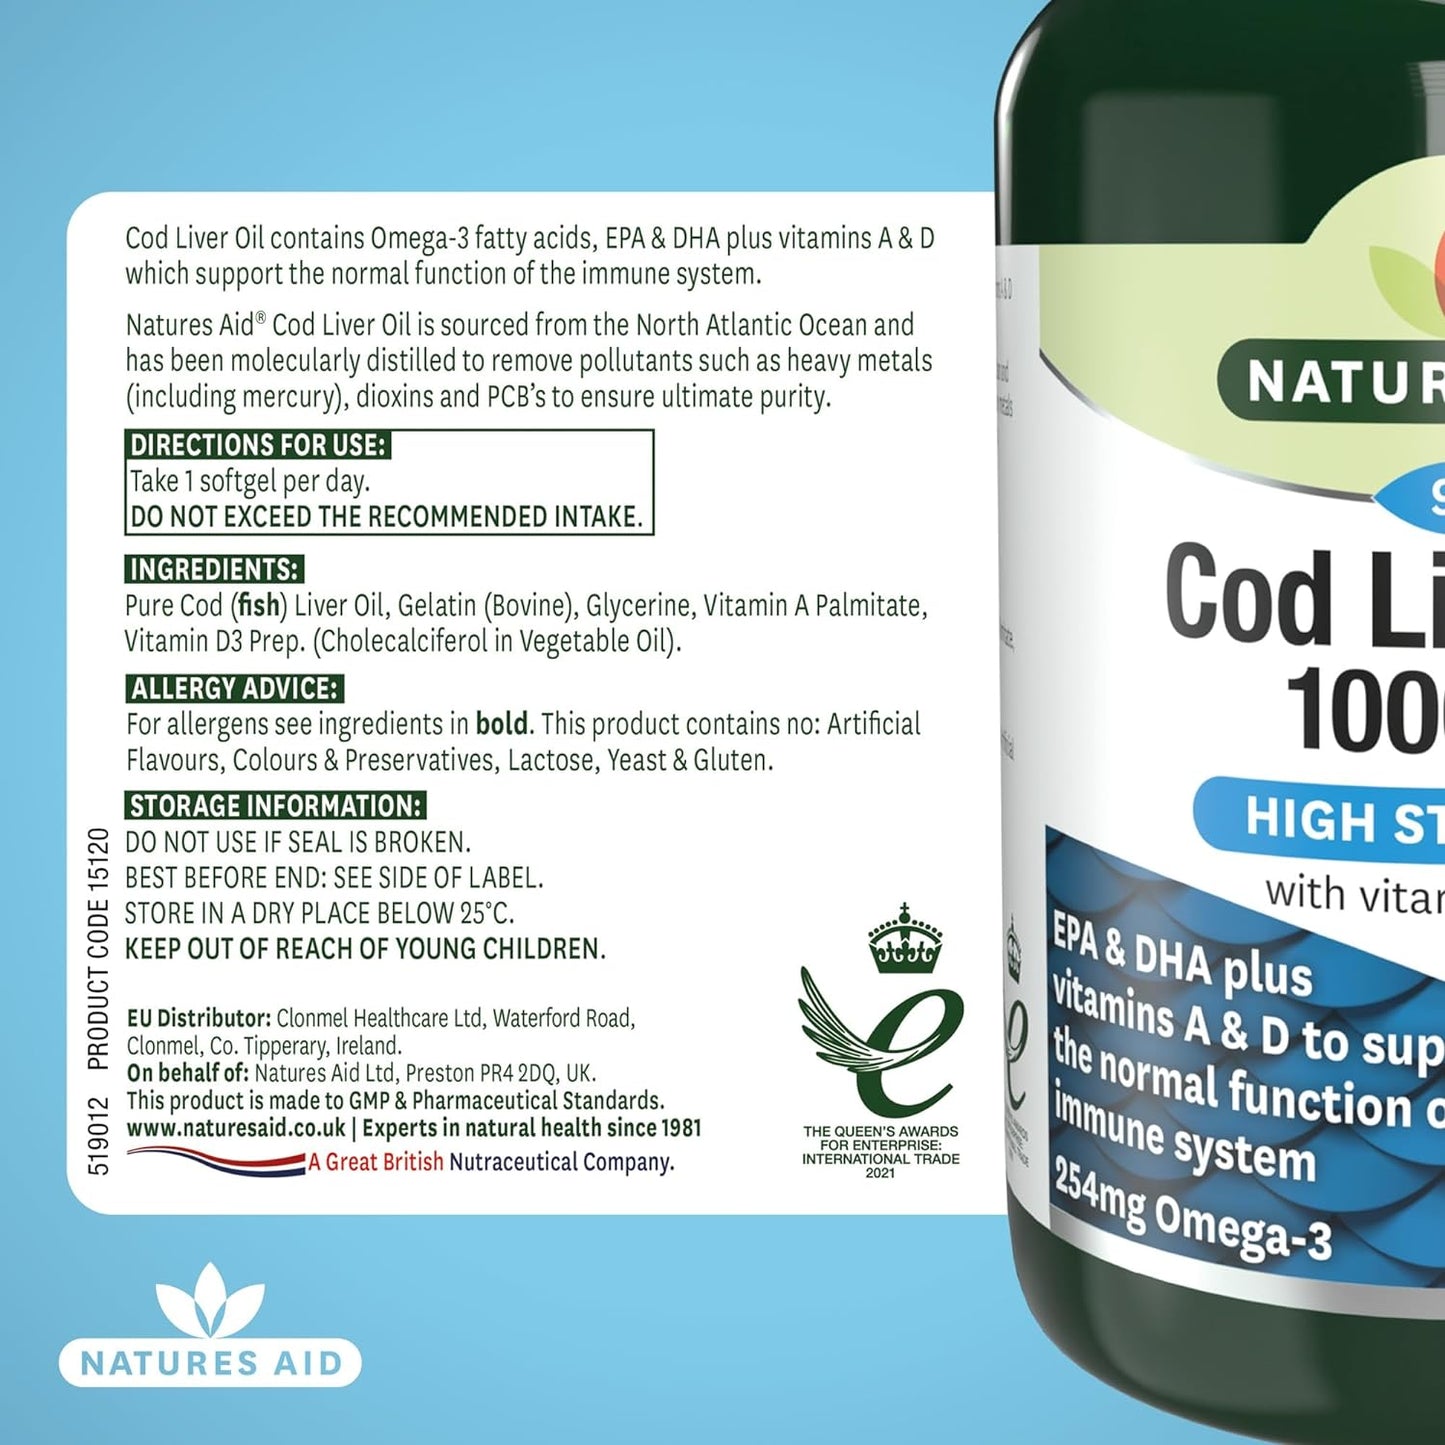 1000Mg High Strength Cod Liver Oil - Pack of 90 Capsules (Packaging May Vary)